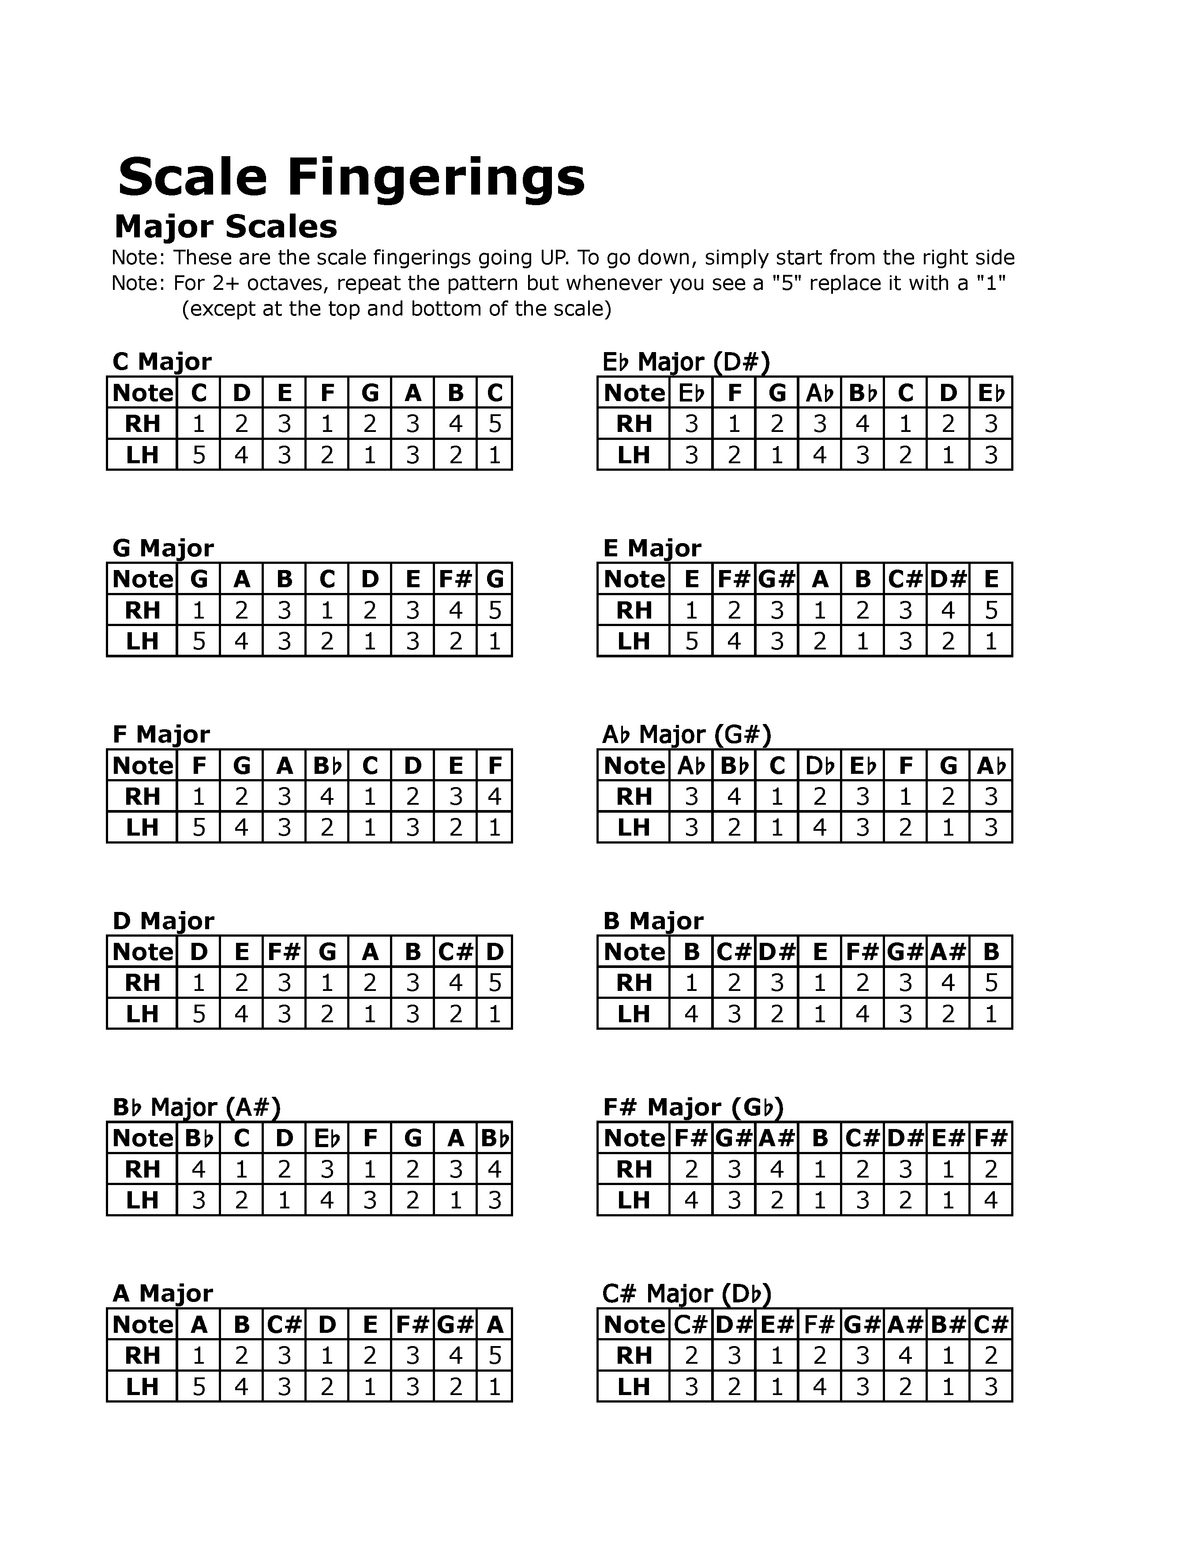 Major Scale Fingerings Scale Fingerings Major Scales Note These Are The Scale Fingerings Going Studocu